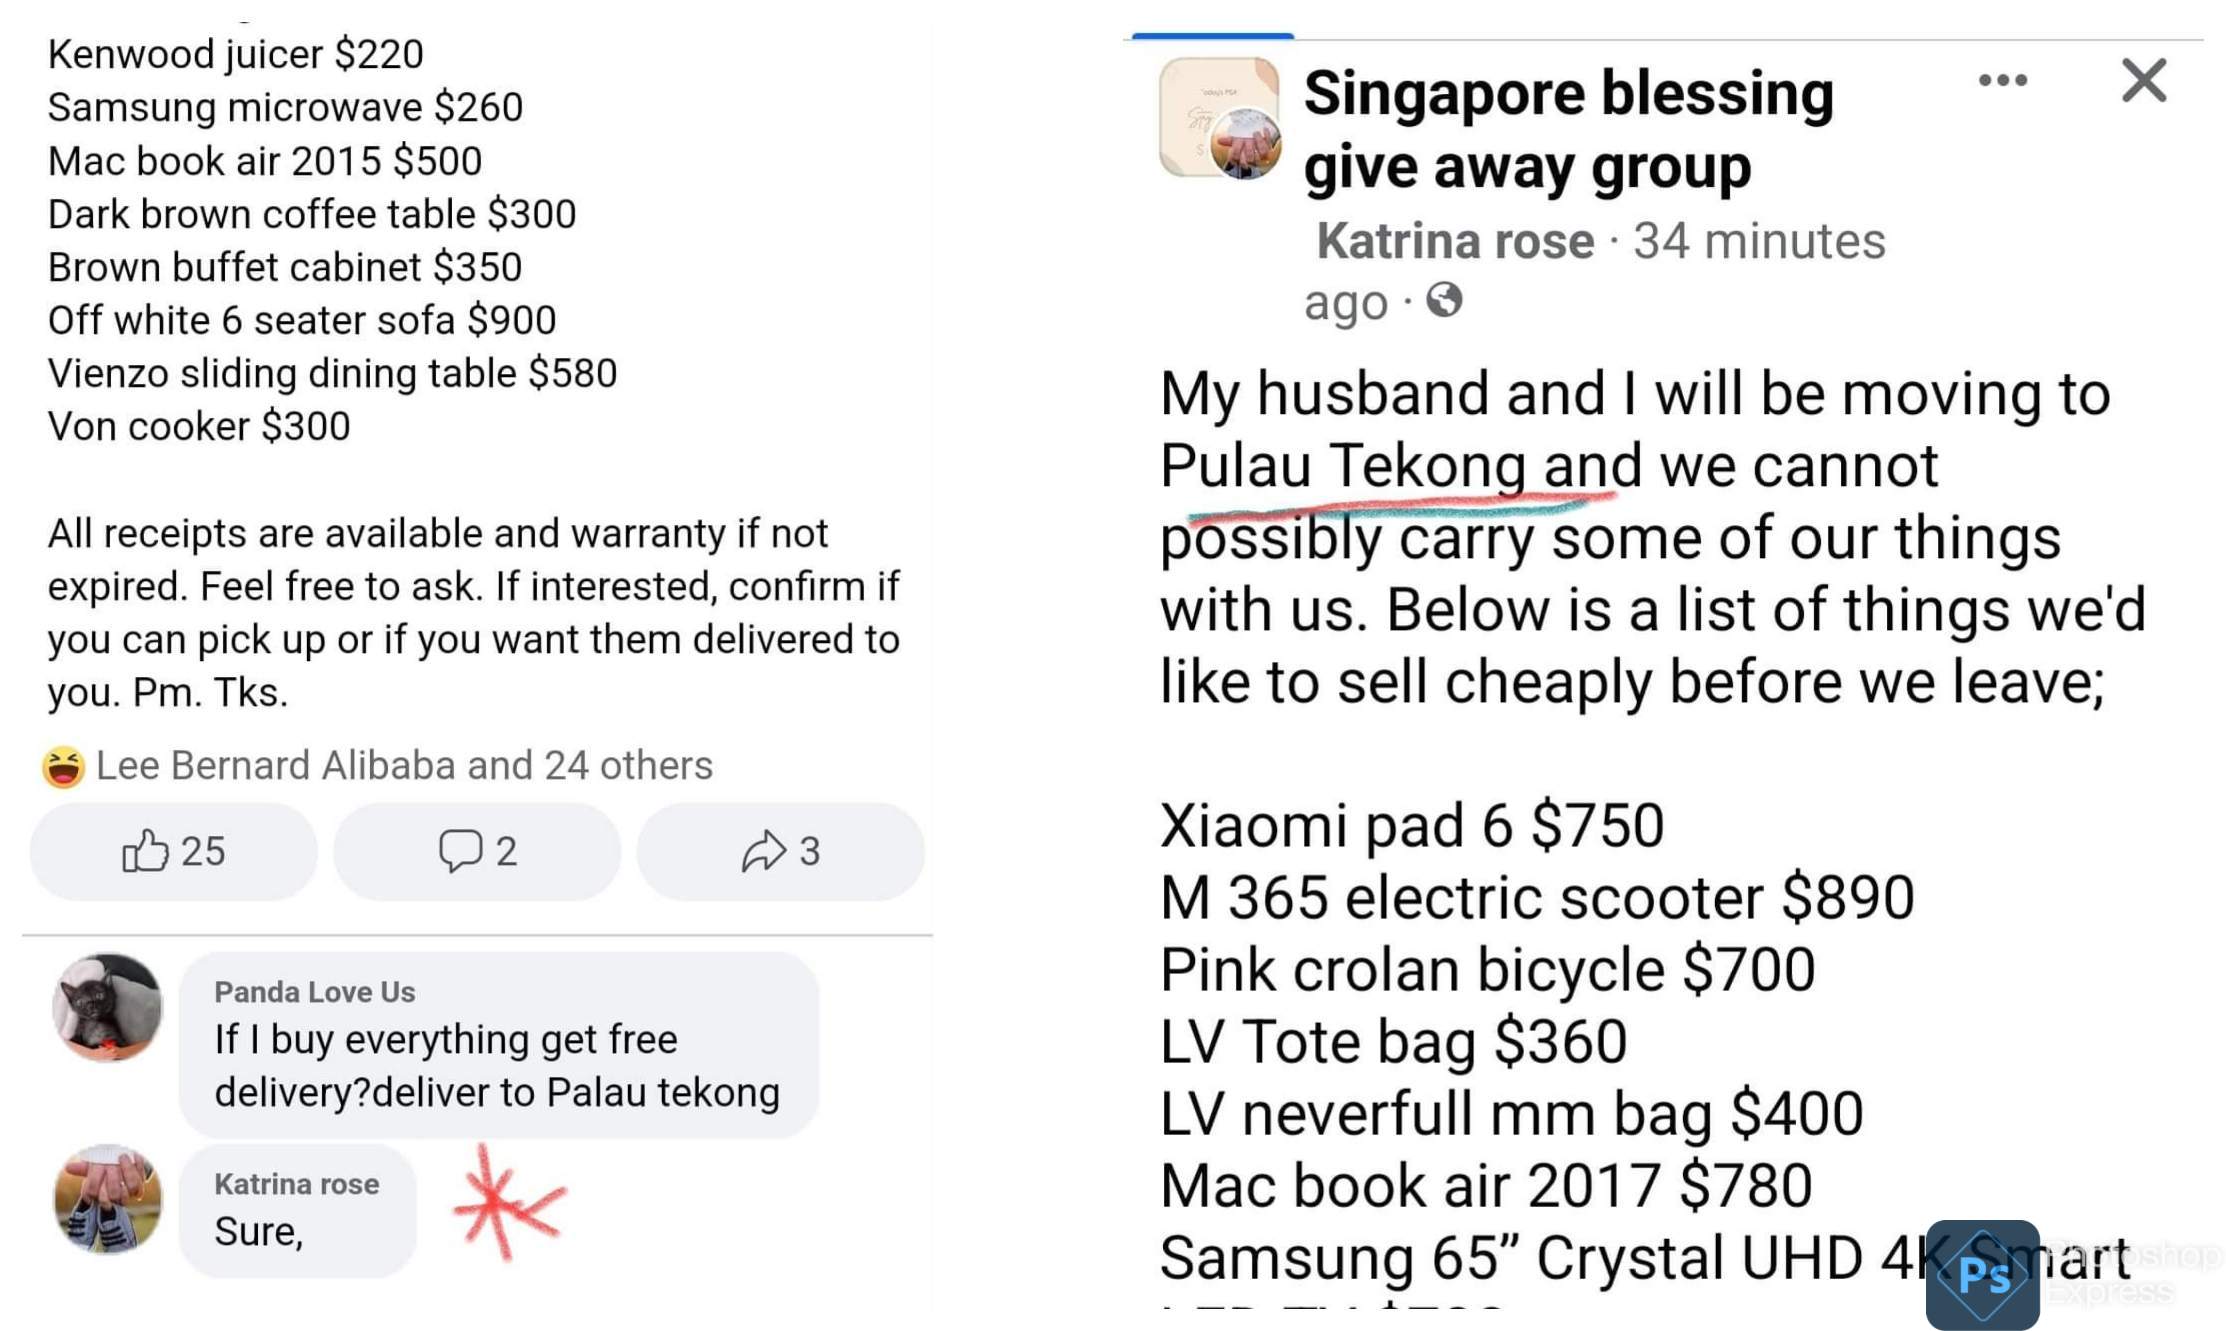 SCAMMER SAY SHE IS MOVING TO “PULAU TEKONG”